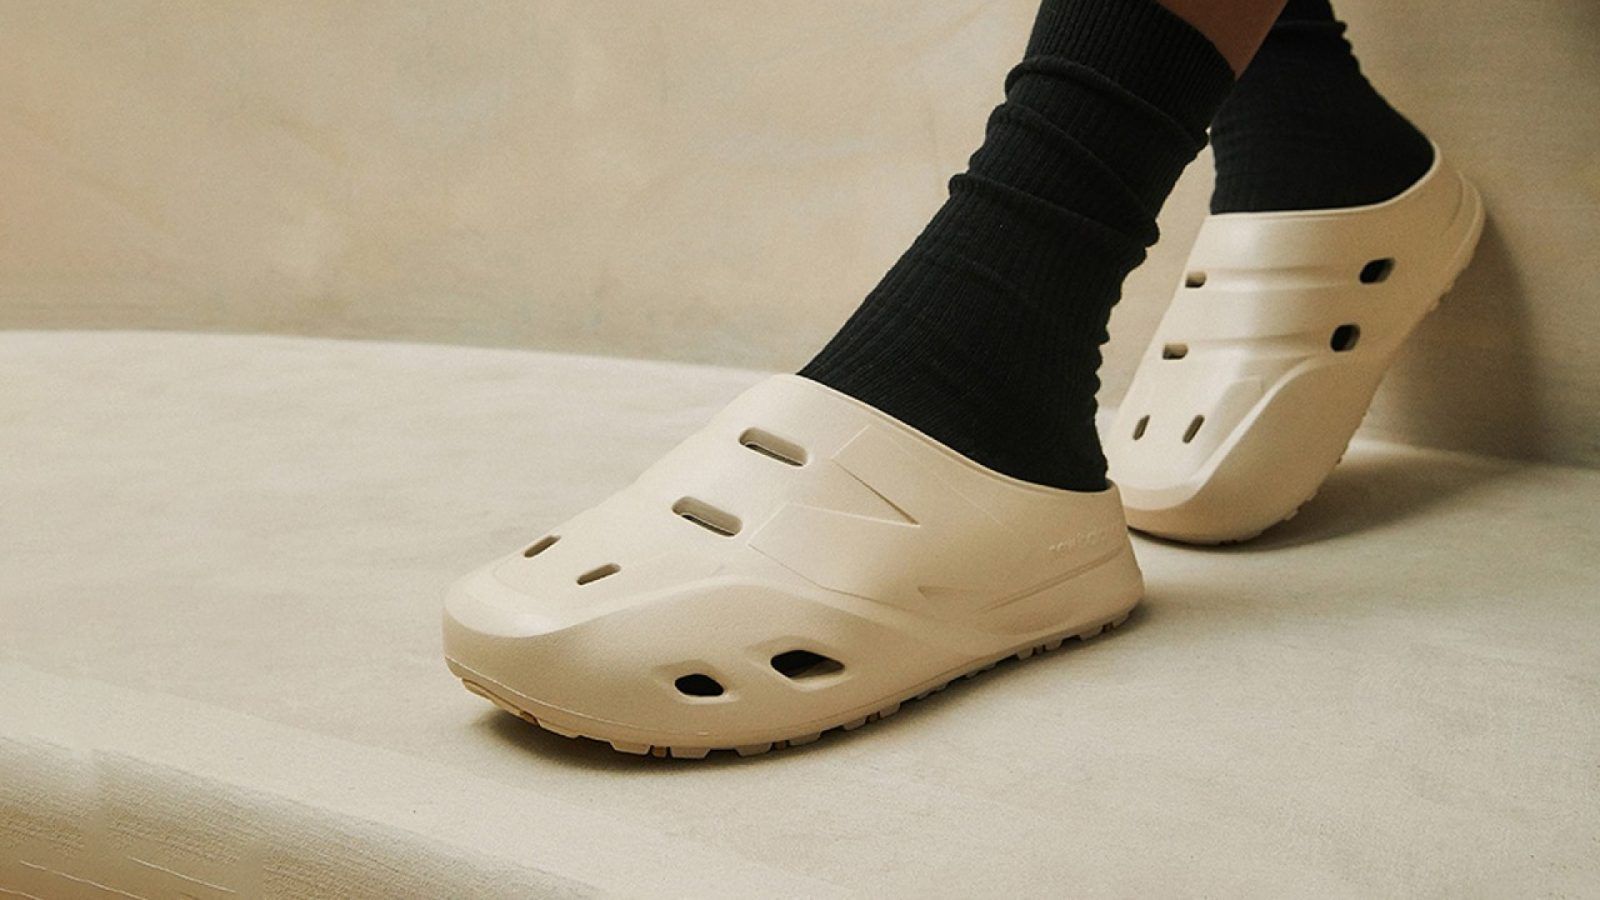 Clog Days of Summer: The good, the ‘bad’ and the chunky